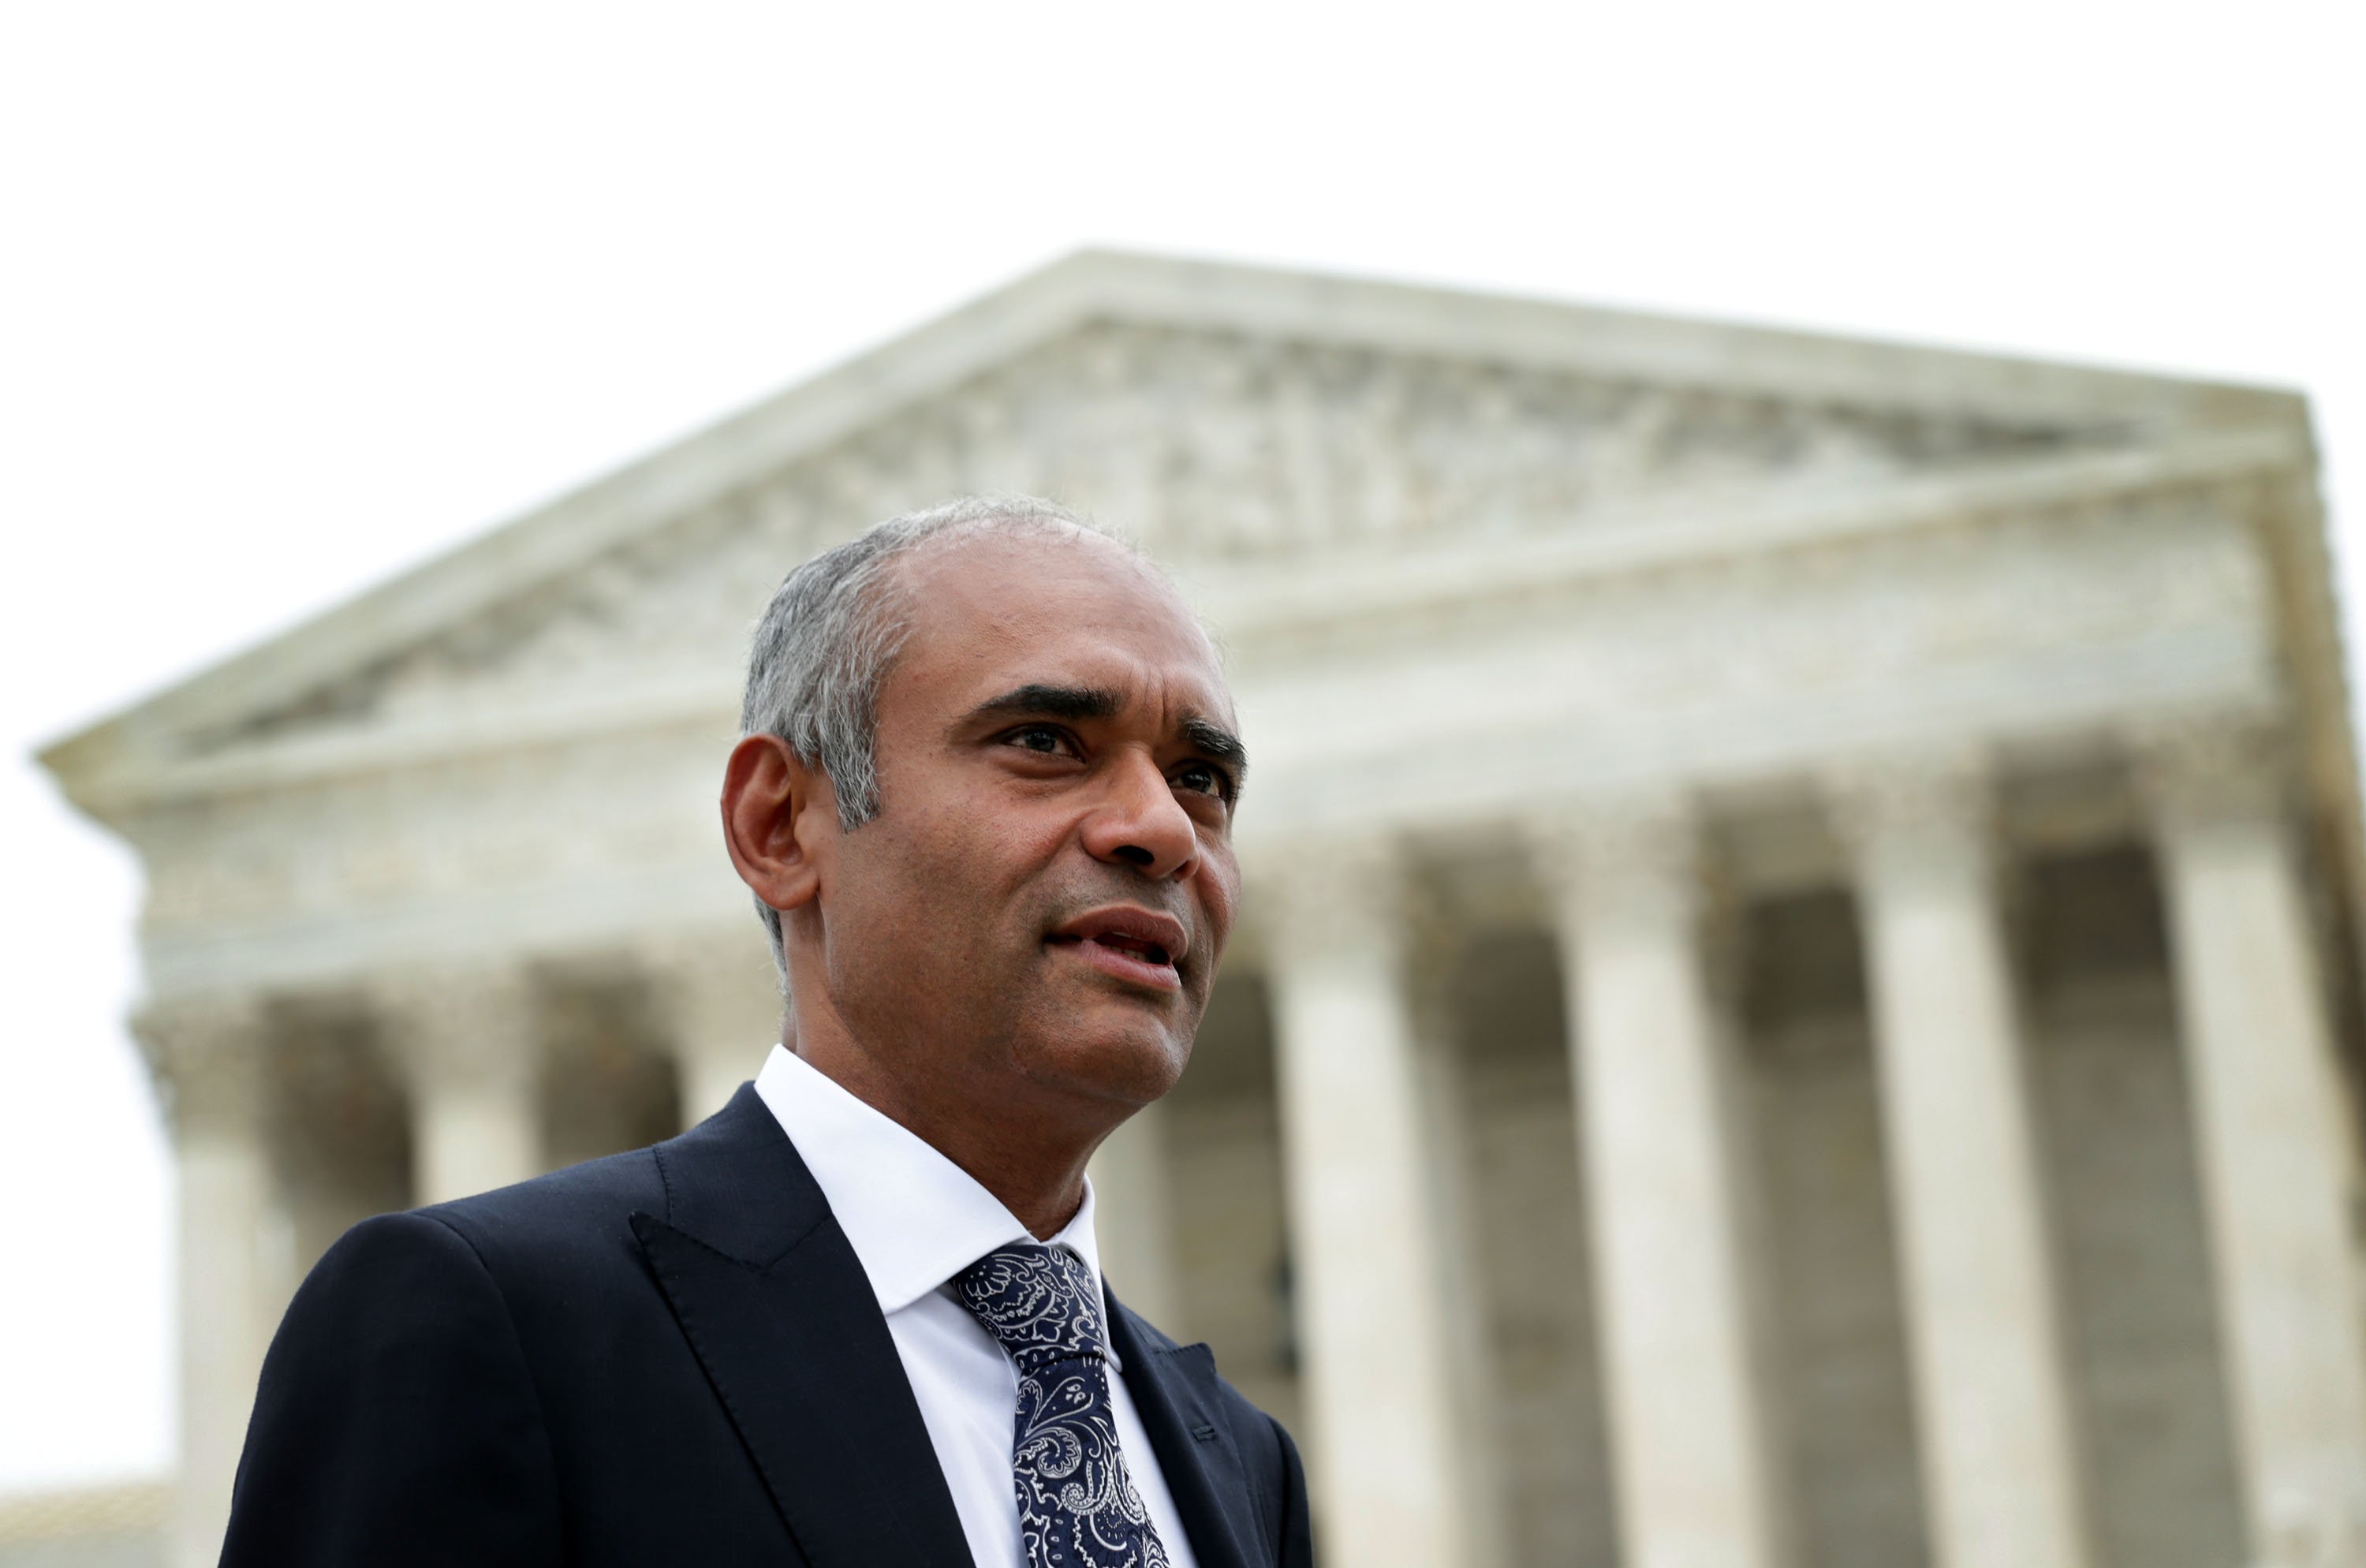 Aereo CEO Chet Kanojia leaves the U.S. Supreme Court after oral arguments on April 22, 2014 in Washington, DC. (Alex Wong—Getty Images)